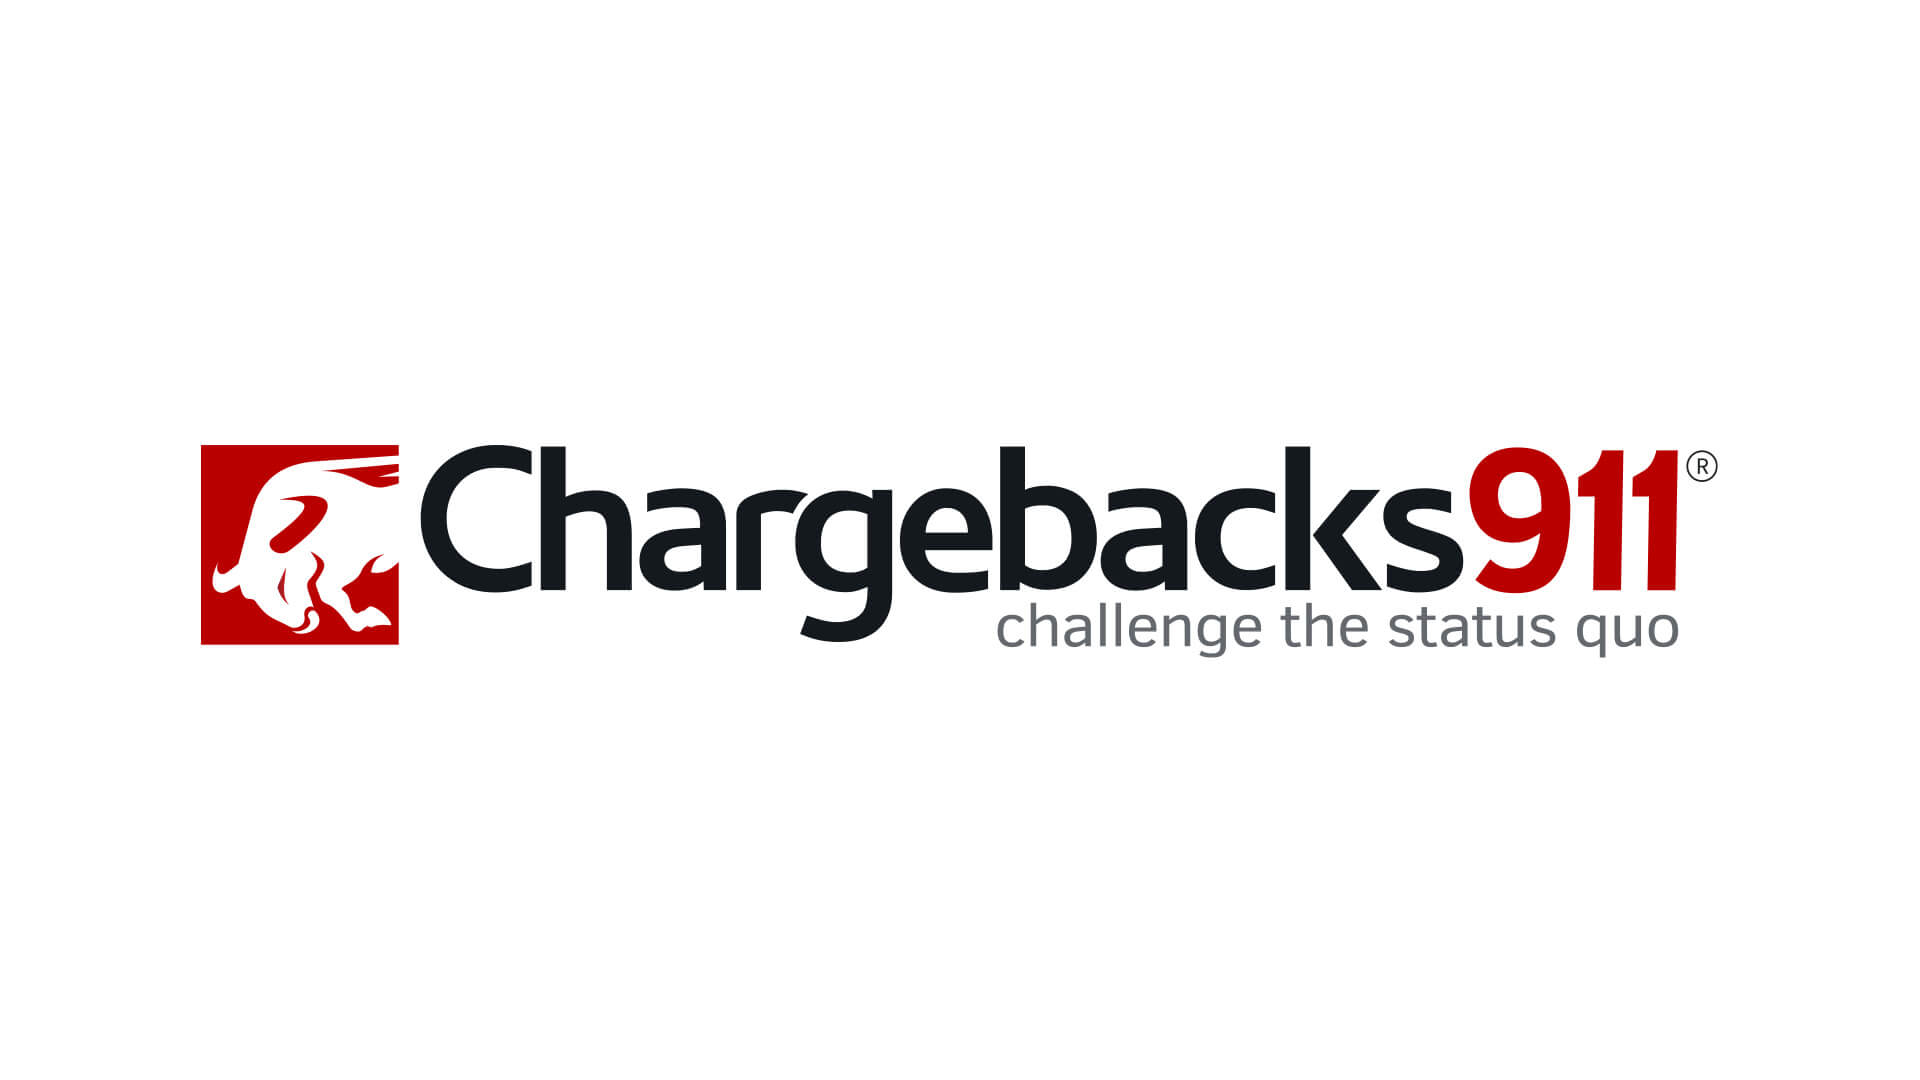 Chargebacks911 | Chargeback Remediation & Loss Recovery